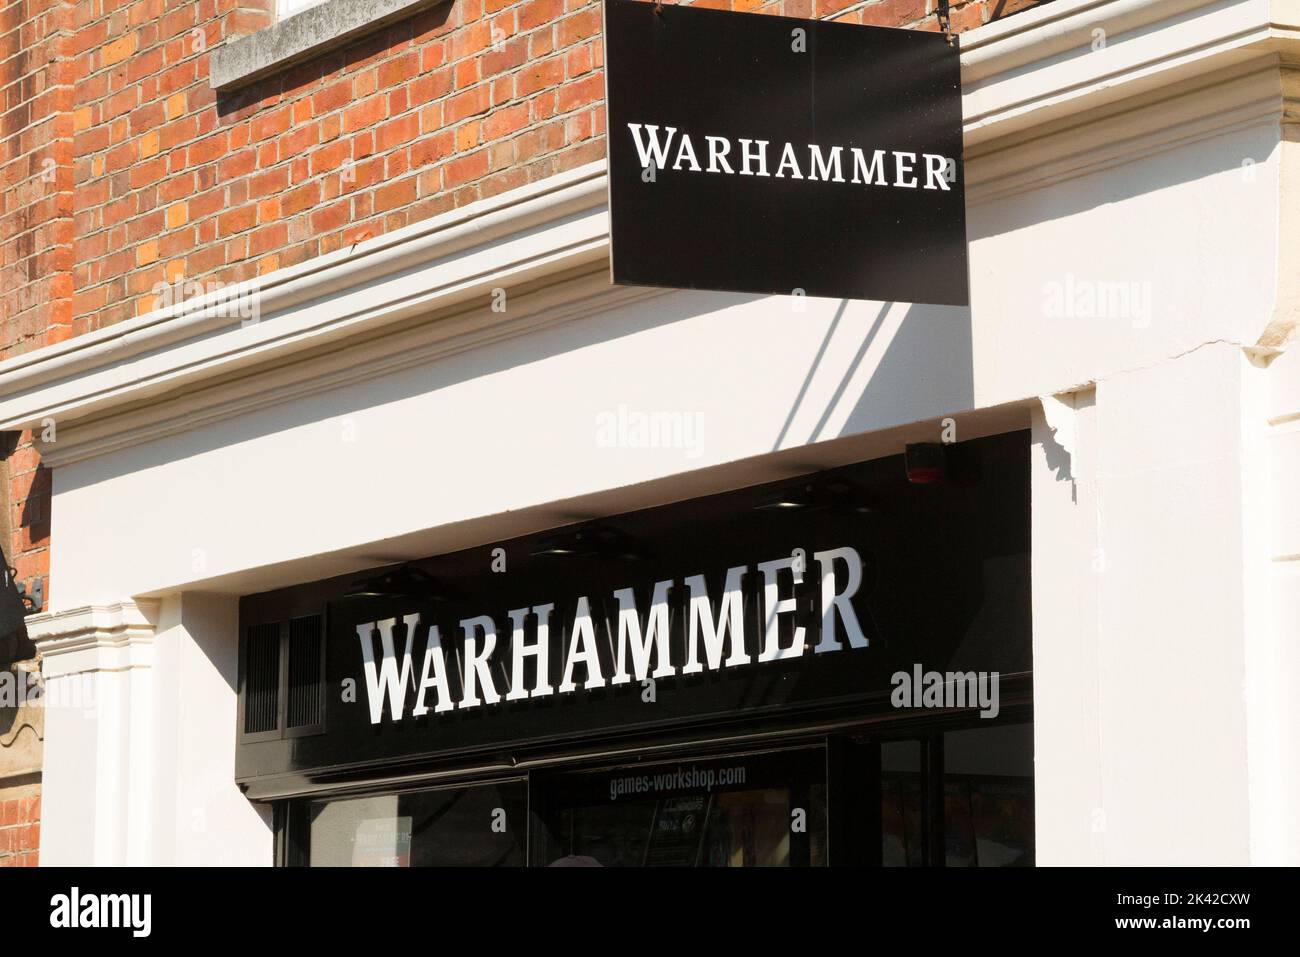 Sign / signage of the Warhammer / War Hammer hobby store shop in Brighton, East Sussex. Unit 7, Nile Pavilions, Nile St, Brighton BN1 1HW(131) Stock Photo